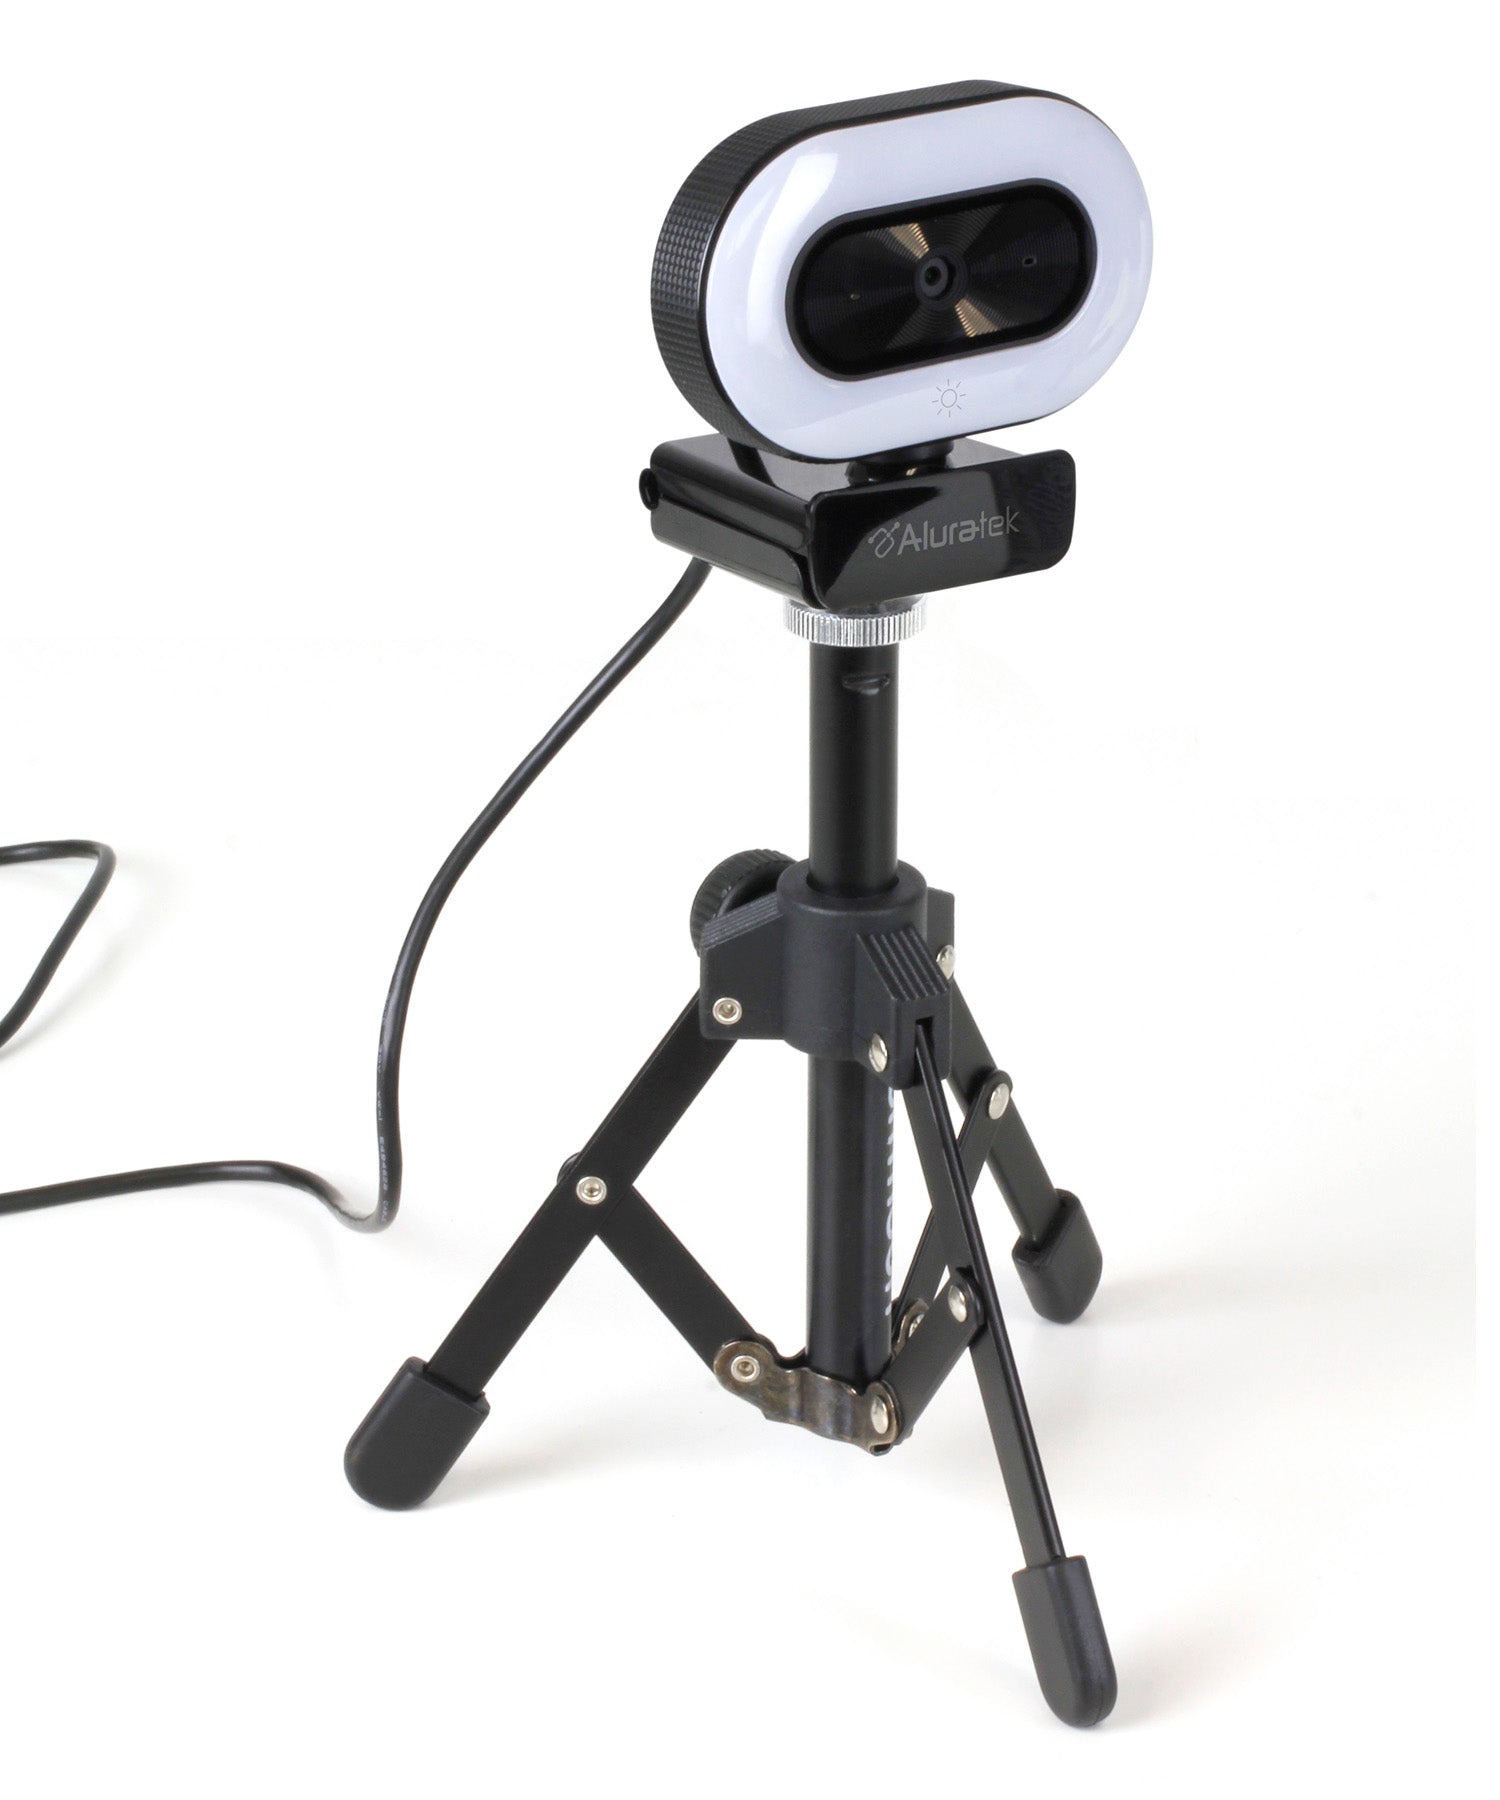 LIVE 1080p HD Webcam with Ring Light, Auto Focus and Directional Noise